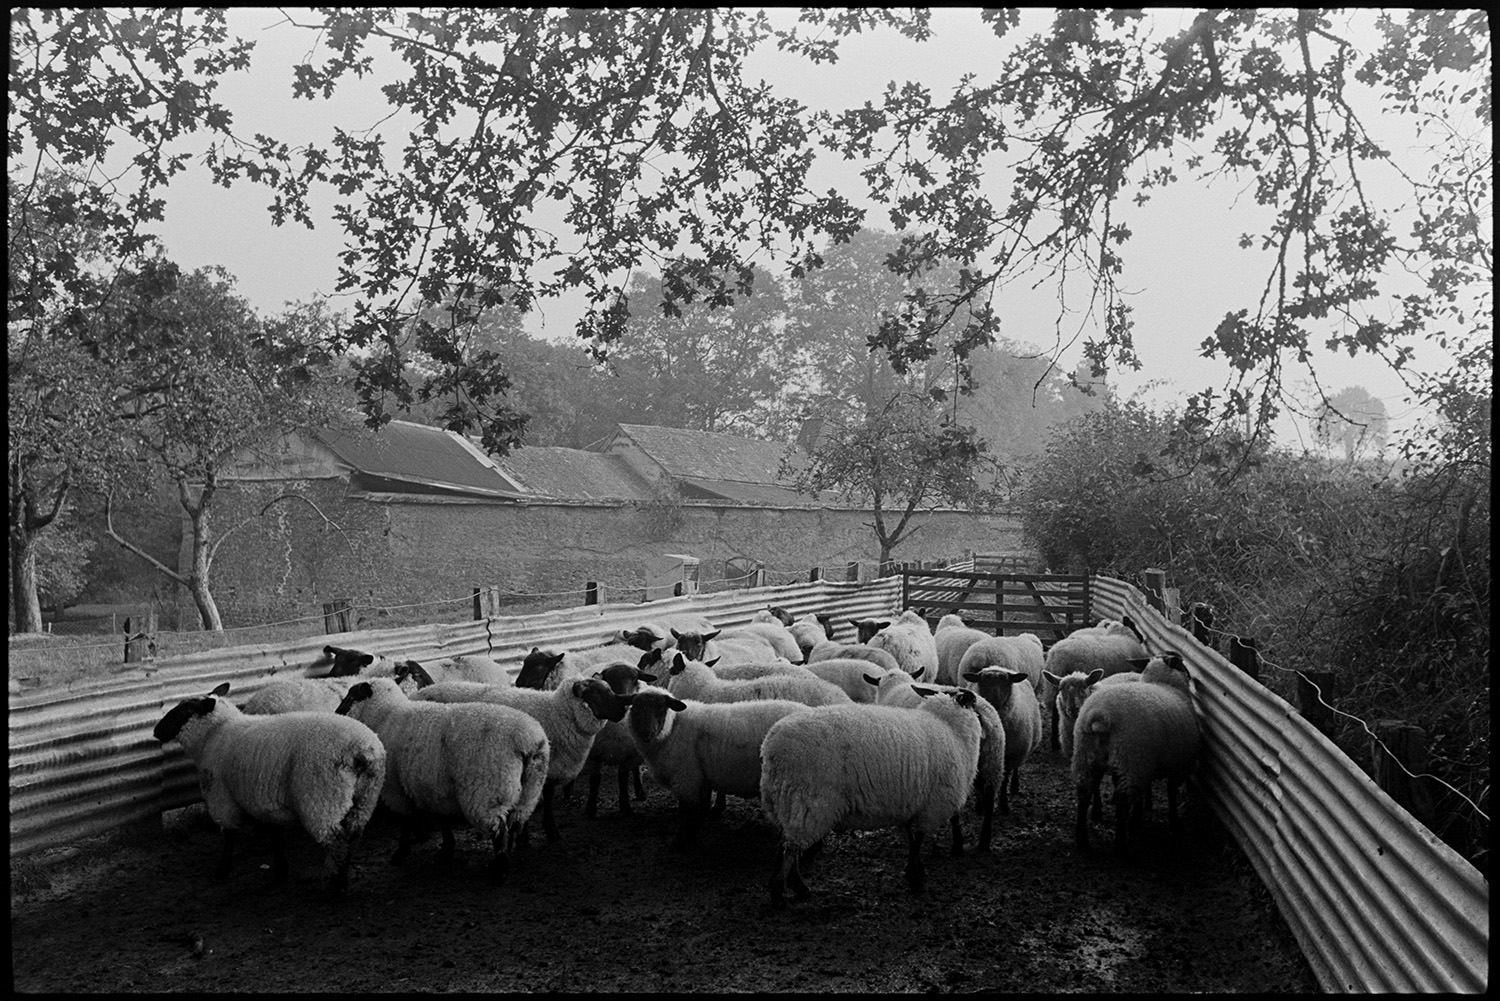 Farmer checking sheep in pen, rams in orchard. 
[Sheep in a corrugated iron pen in and orchard at Westpark, Iddesleigh. Farm buildings can be seen in the background.]